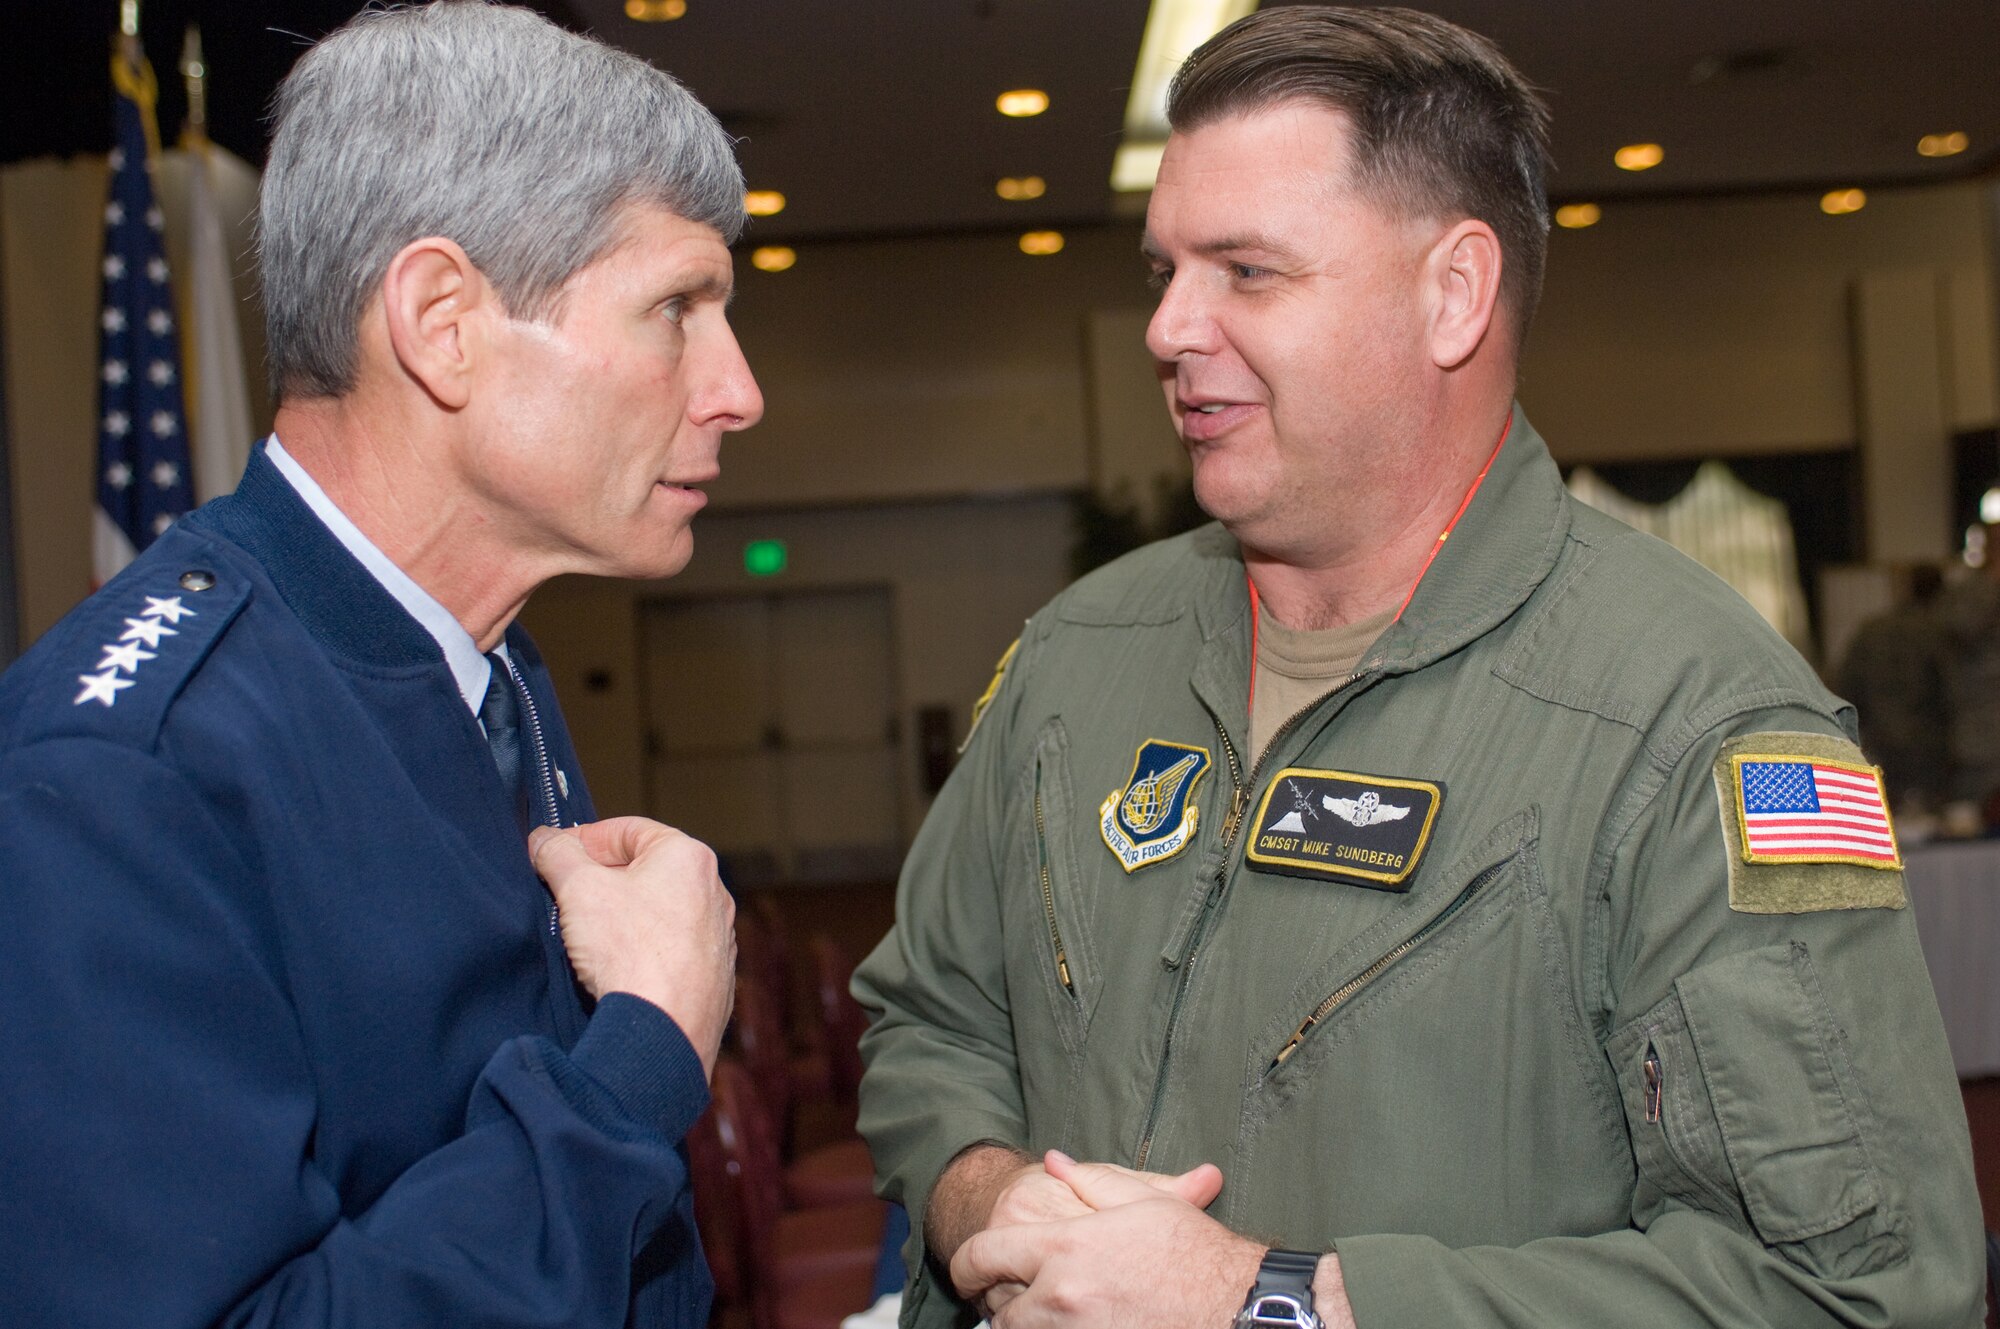 YOKOTA AIR BASE, Japan -- General Norton Schwartz, Air Force chief of staff, talks with Chief Master Sgt. Michael Sundberg, 36th Airlift Squadron, May 12 about the aging C-130 Hercules fleet following a breakfast at the Yokota Officers' Club. When Chief Sundberg, who will retire this summer after 30 years of service, entered the Air Force in 1979 the 374th Airlift Wing's fleet of C-130s were already five years old. (U.S. Air Force photo/Osakabe Yasuo)